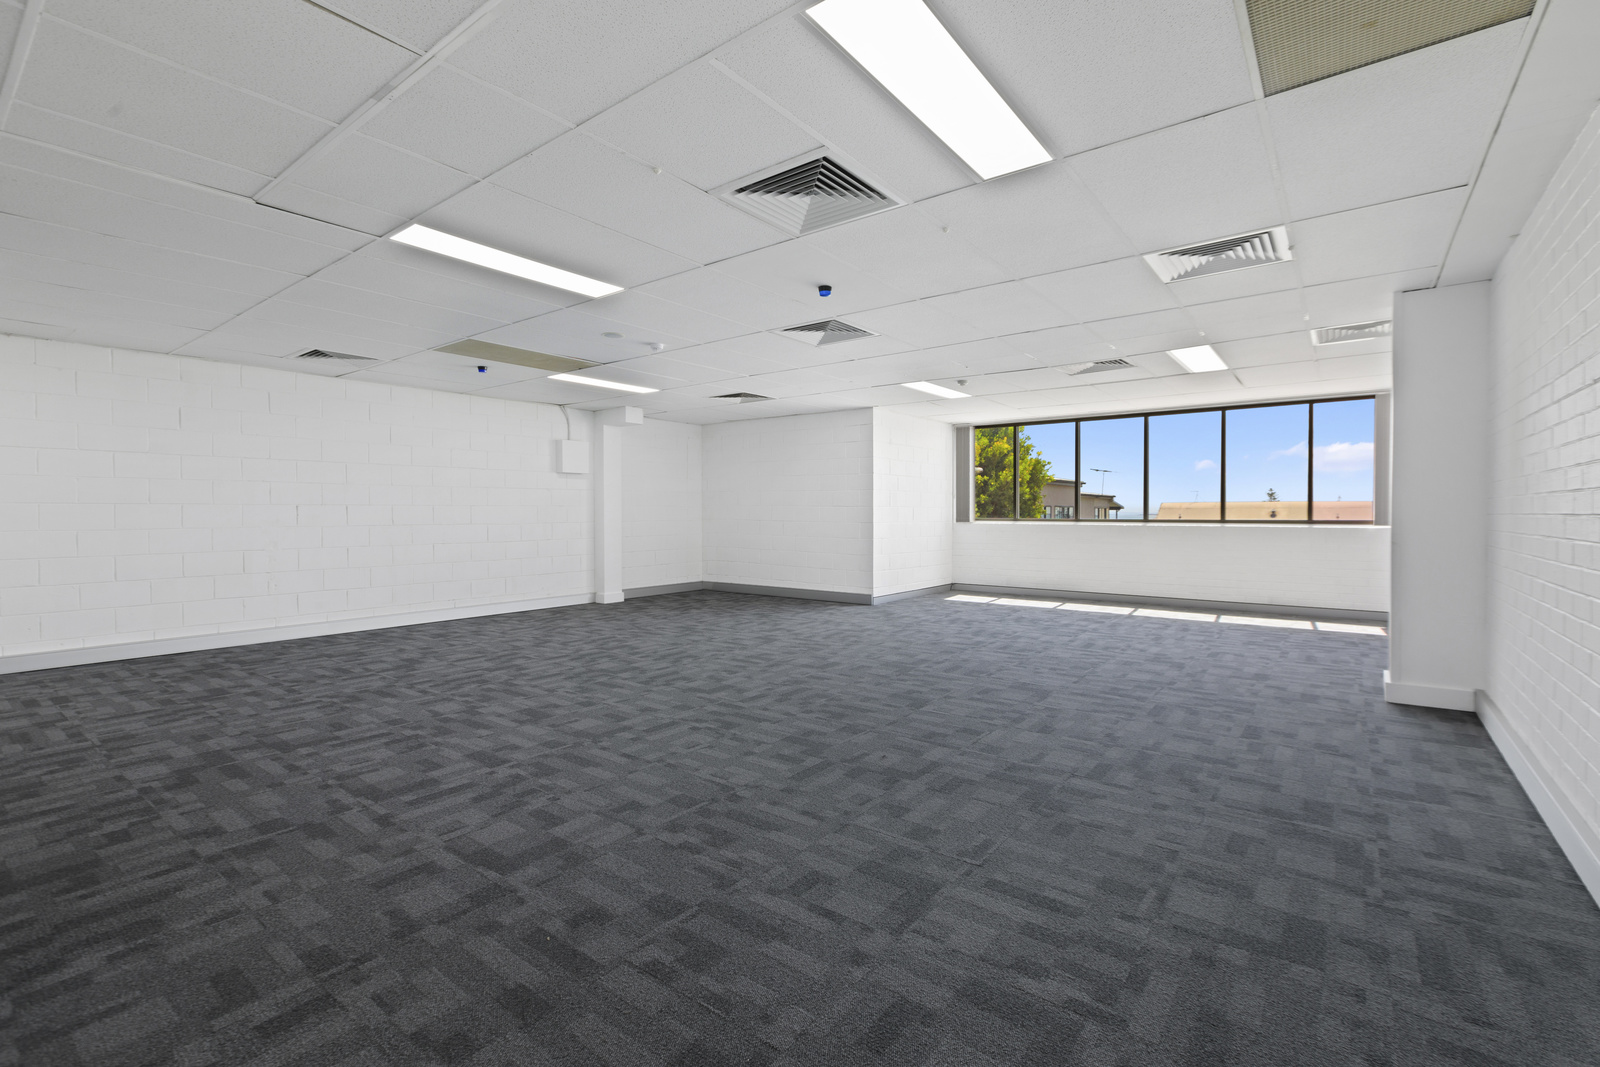 2/182 Bay Terrace, Wynnum QLD 4178 - Leased Office | Commercial Real Estate